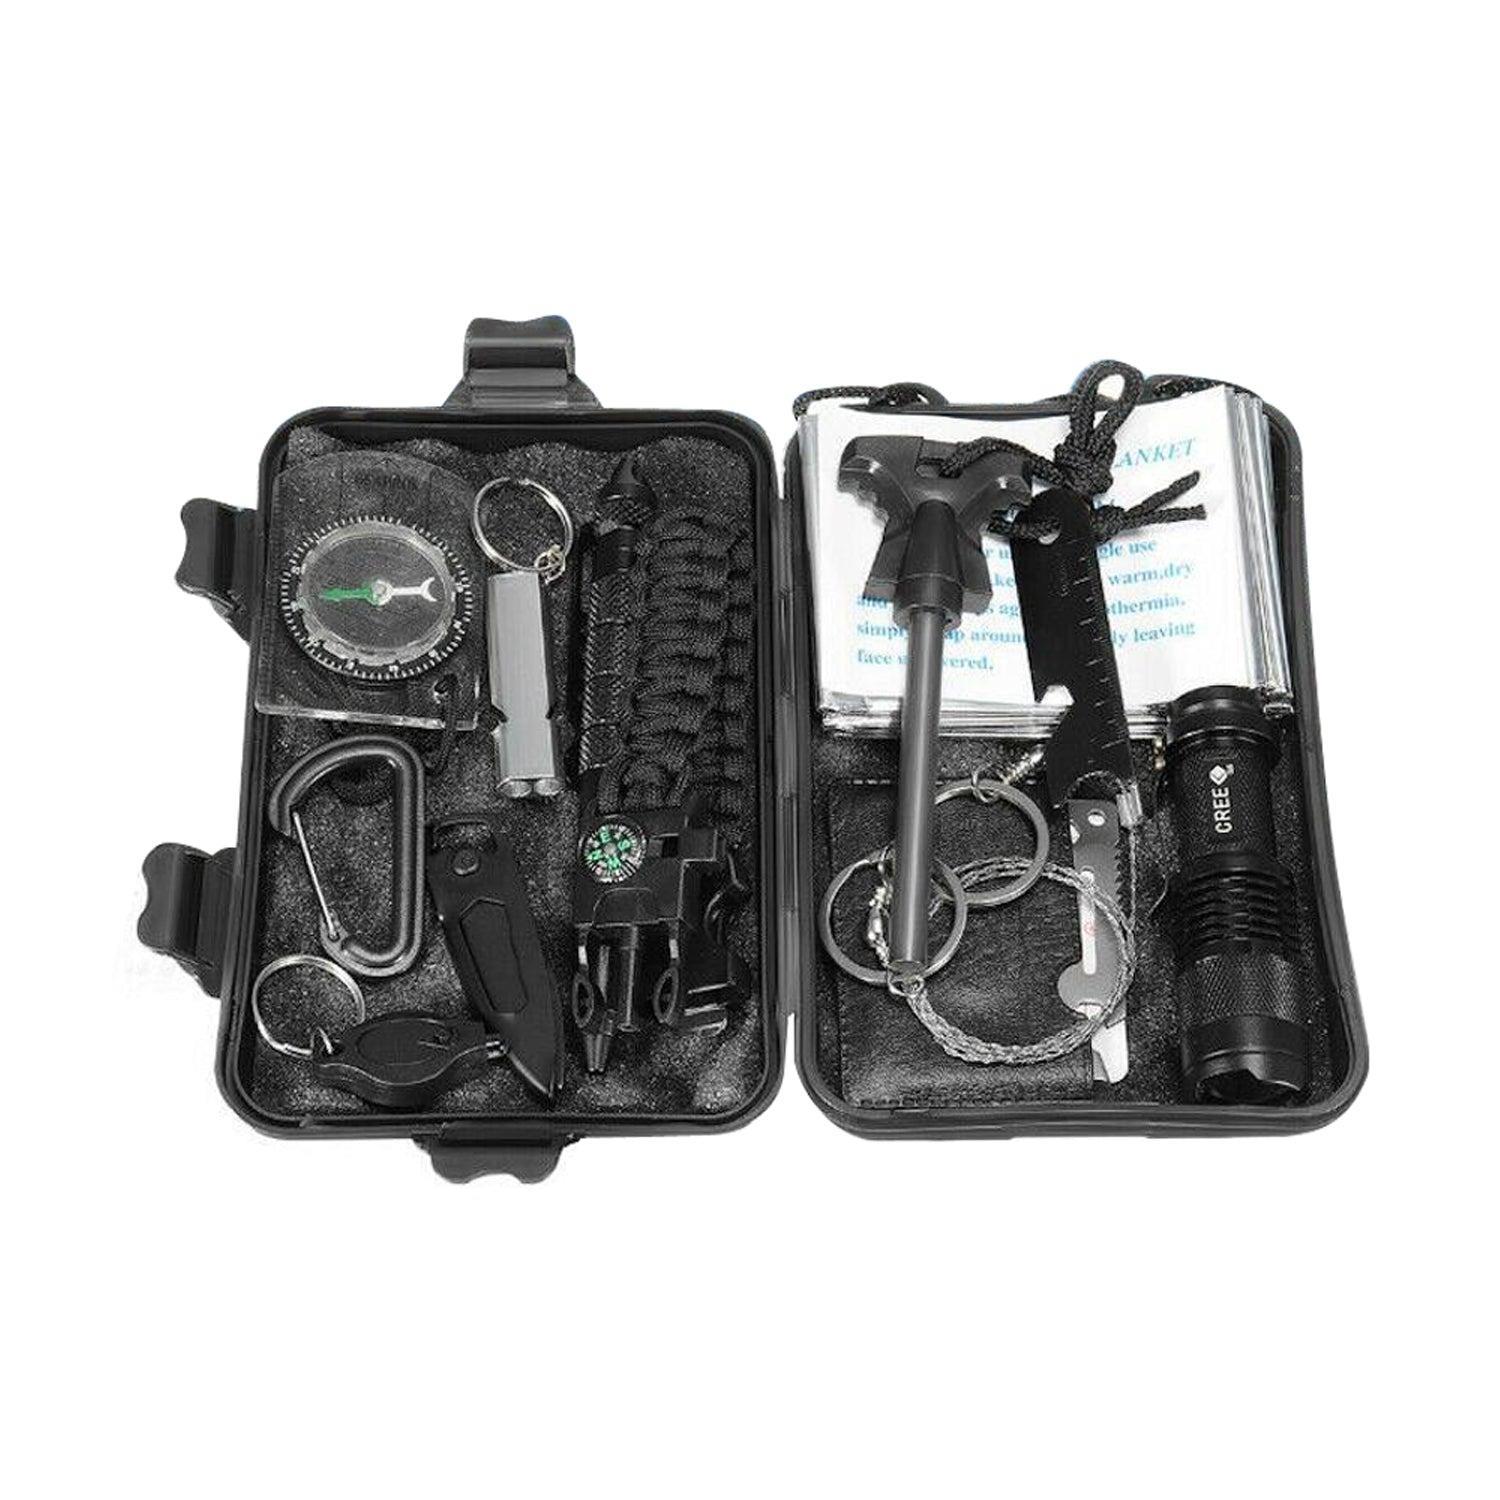 Camping Outdoor Survival Equipment Tactical Kit - 13 in 1